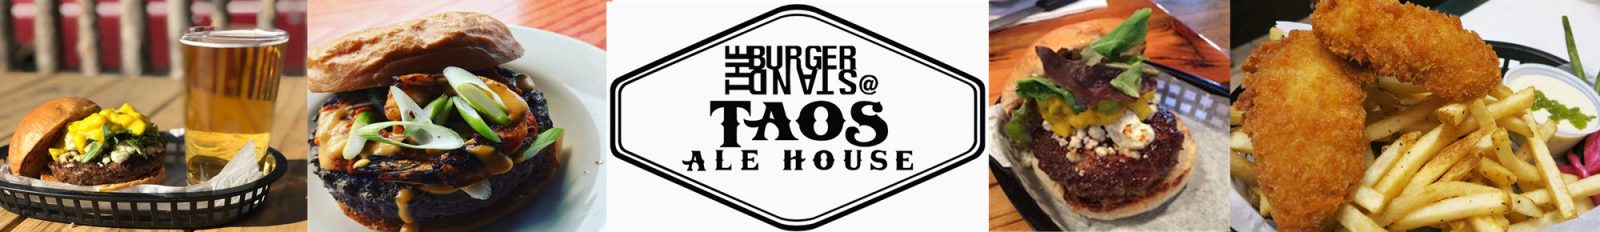 The Burger Stand at Taos Ale House